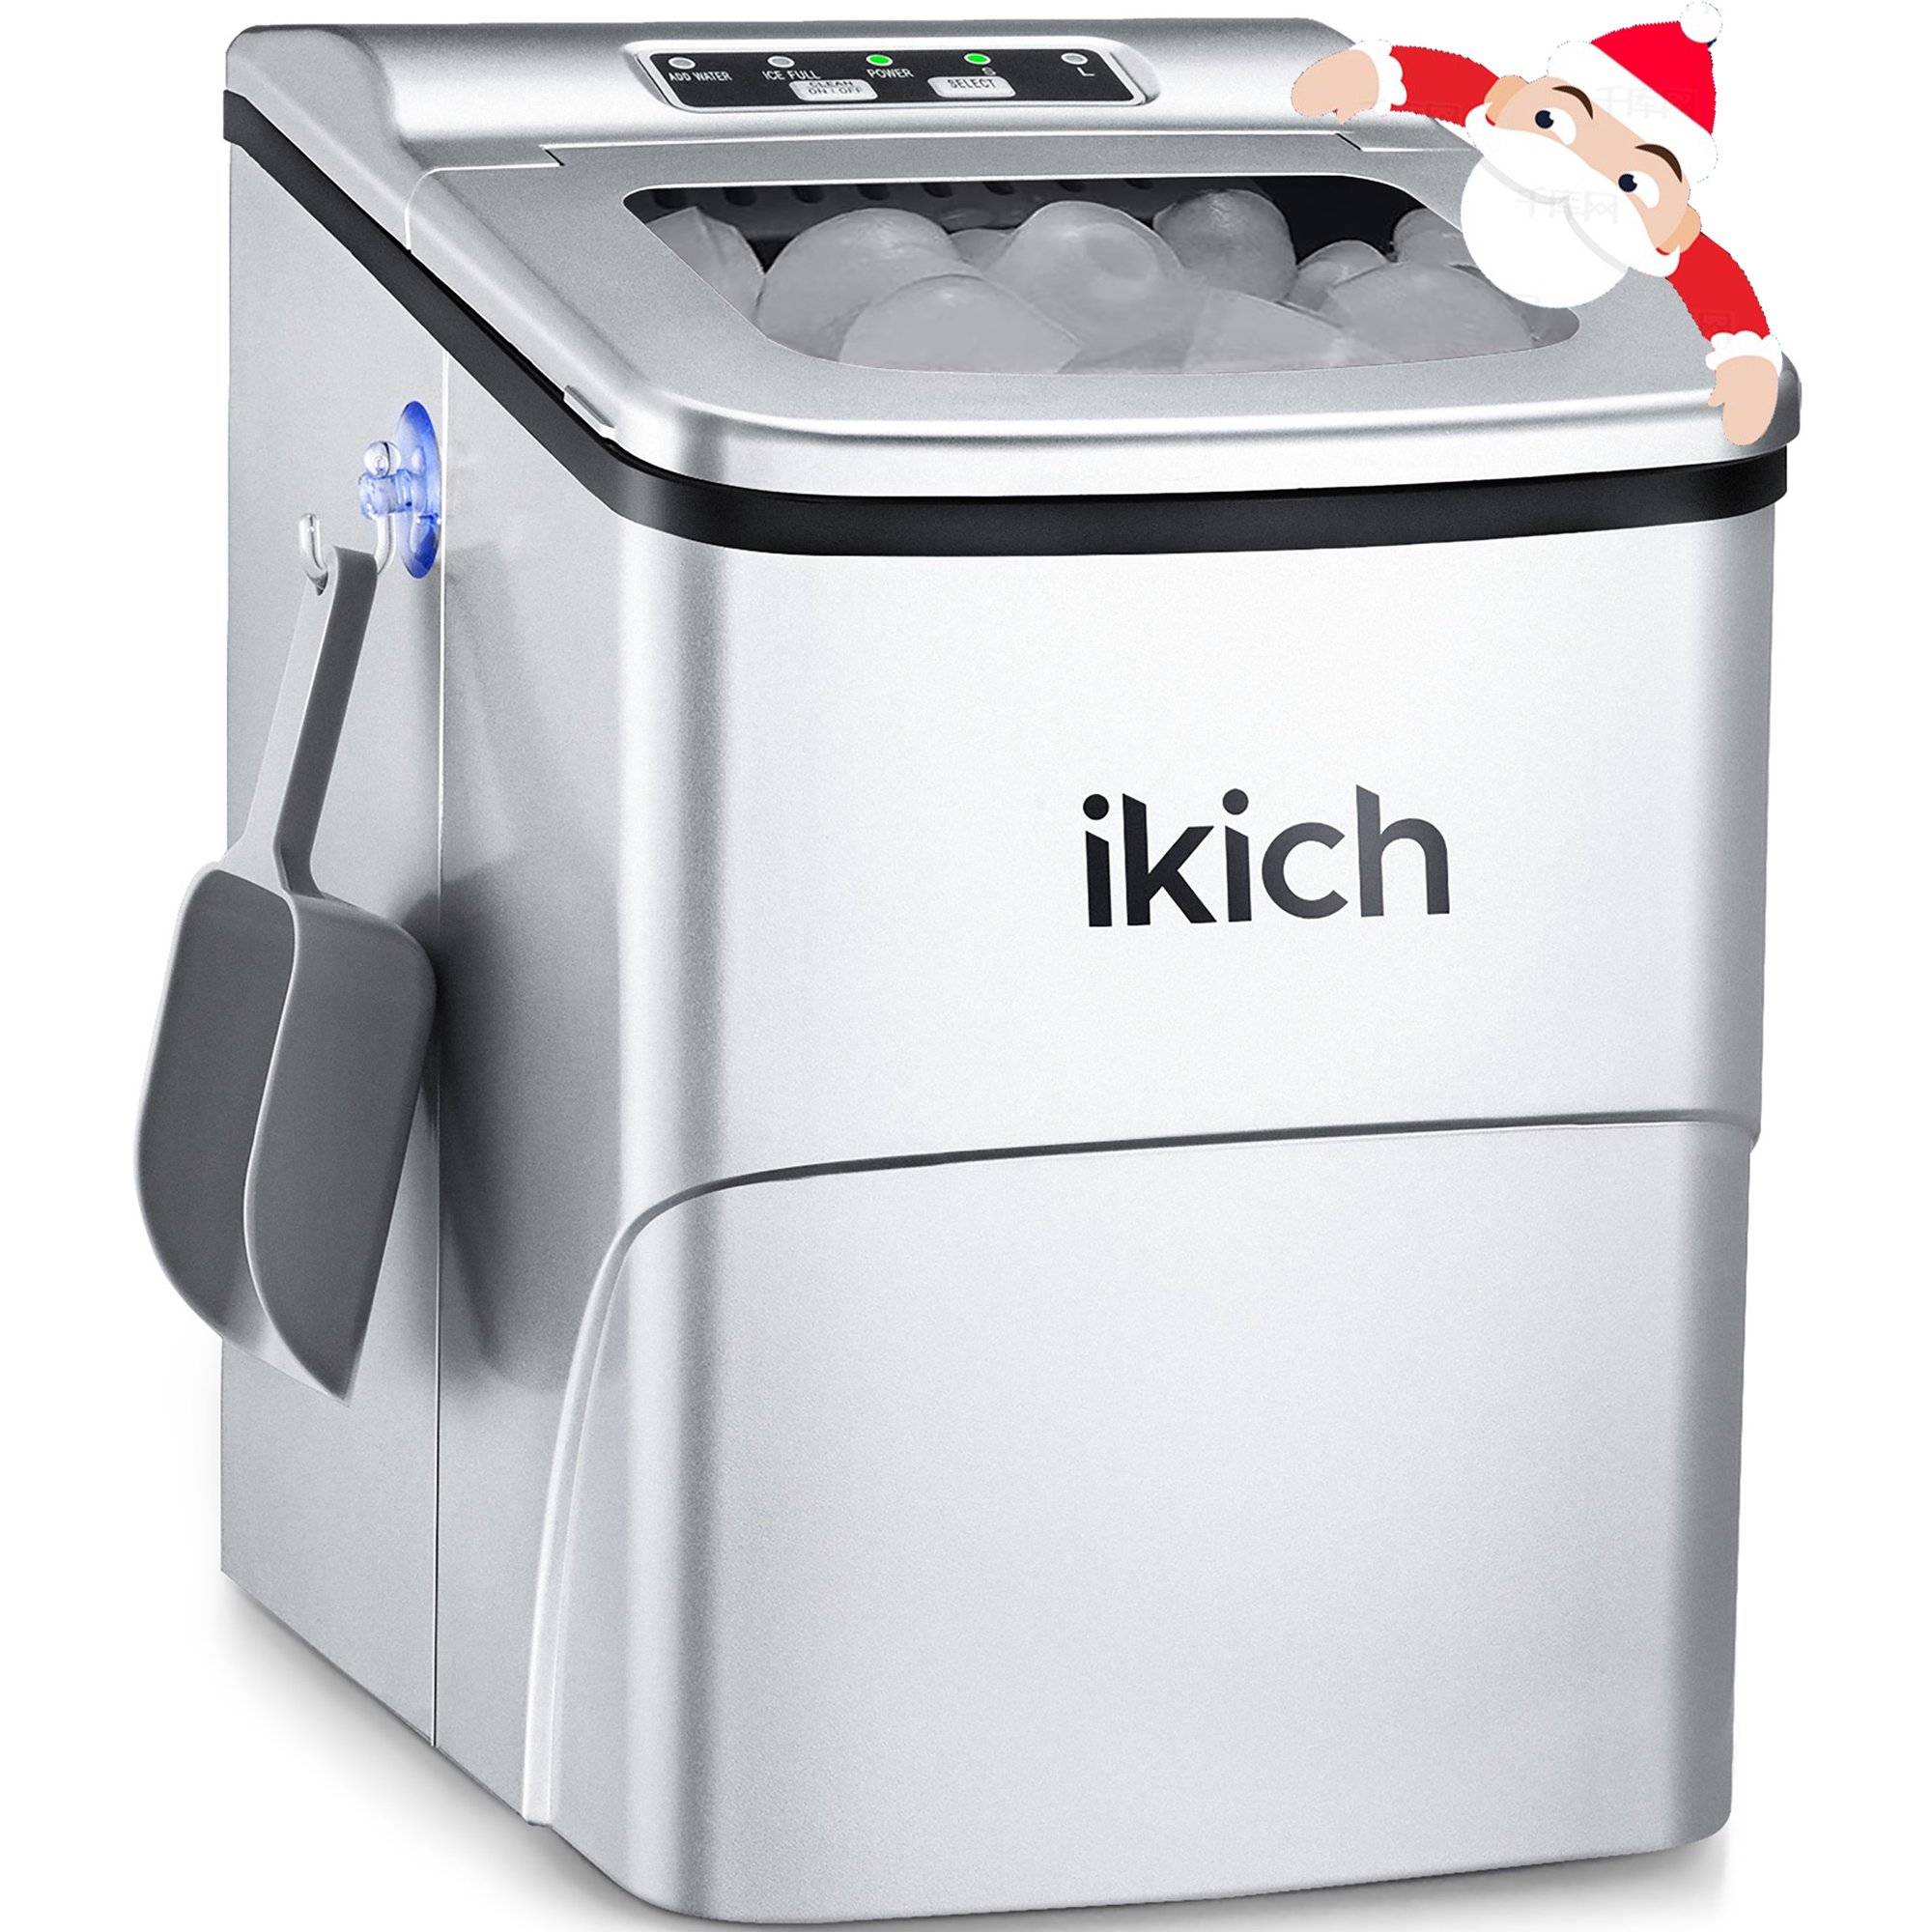 IKICH Portable Ice Maker, 26lb/Day, Self-Cleaning, Stainless Steel